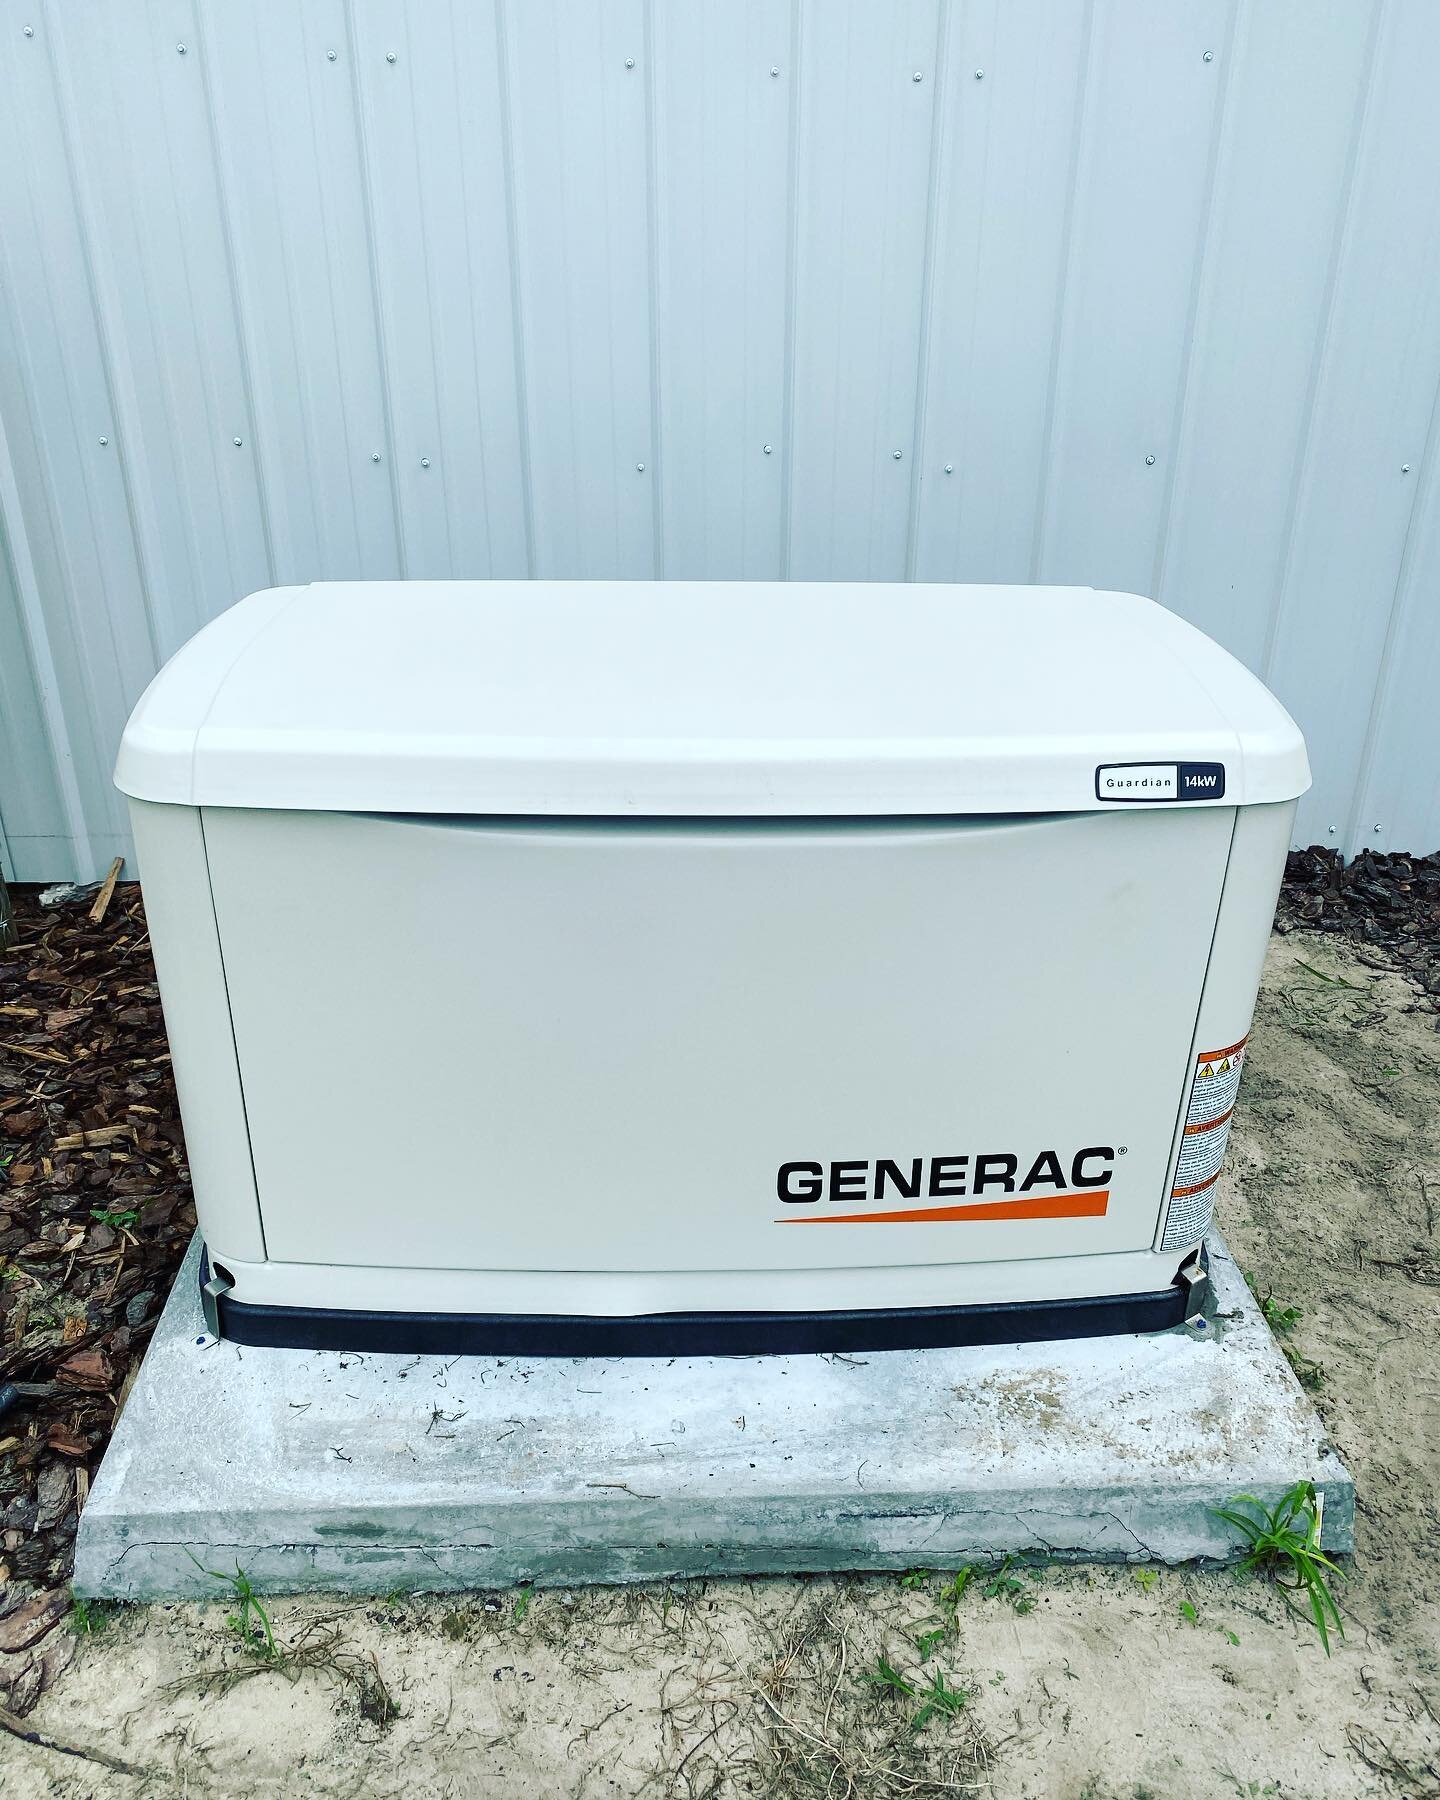 Need a generator installed? We can do that! Contact us today let&rsquo;s discuss the benefits. 
#currentsituation #generator #generac #install #electric #energysolutions #current #residential #commercial #newconstruction #remodels #upgrades #powerme